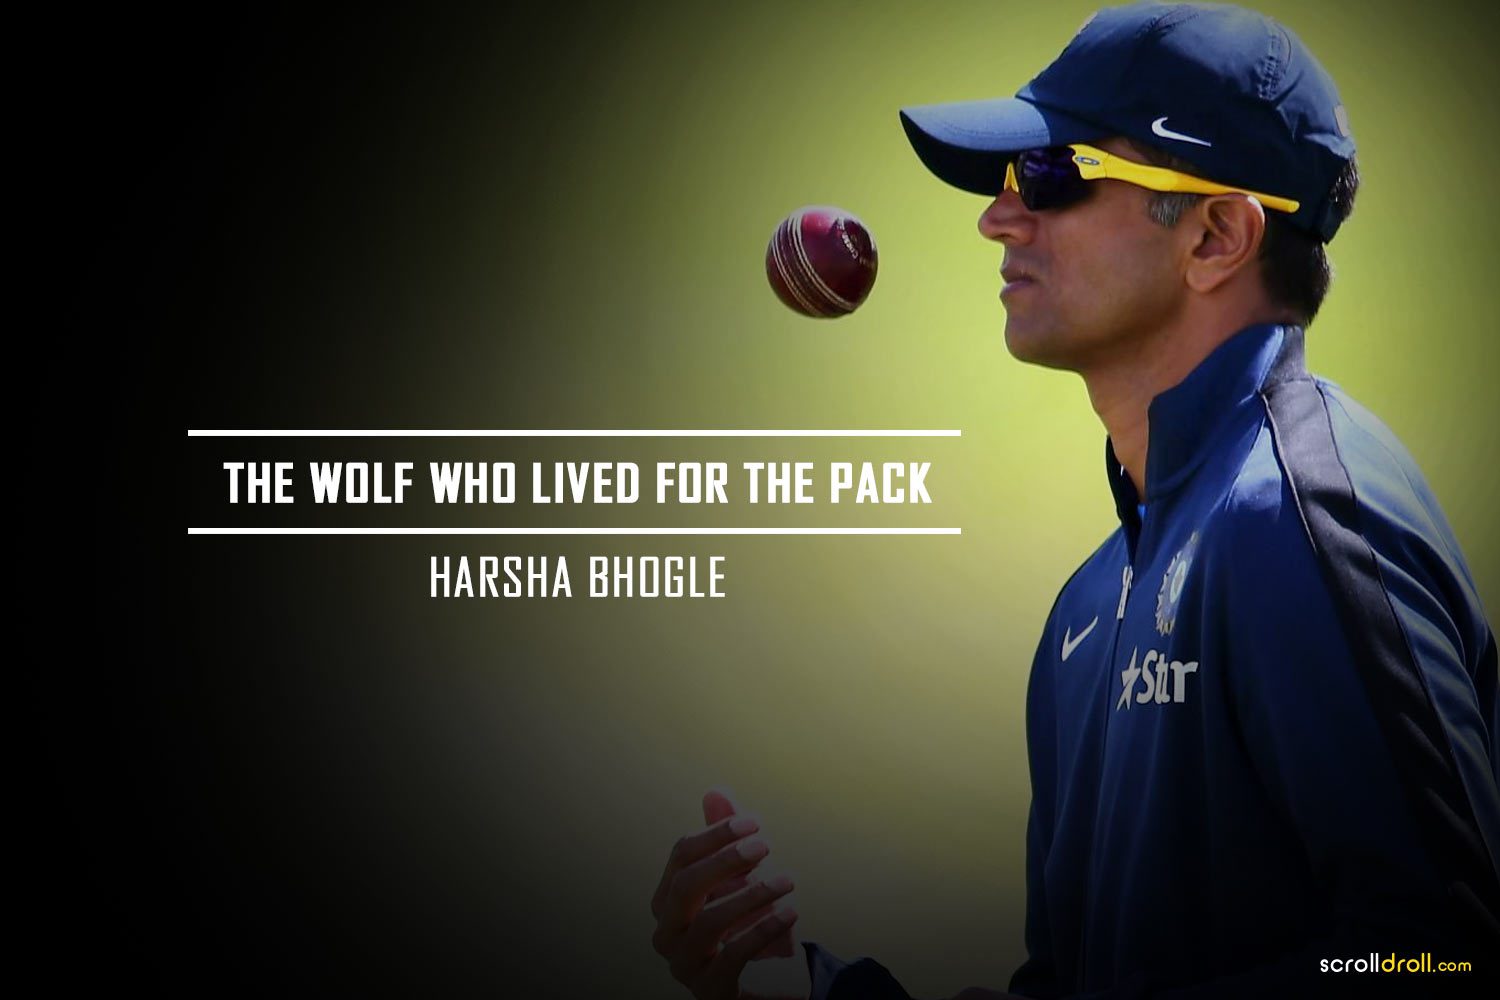 Rahul Dravid Quotes - Harsha Bhogle quote: If you asked Rahul Dravid to